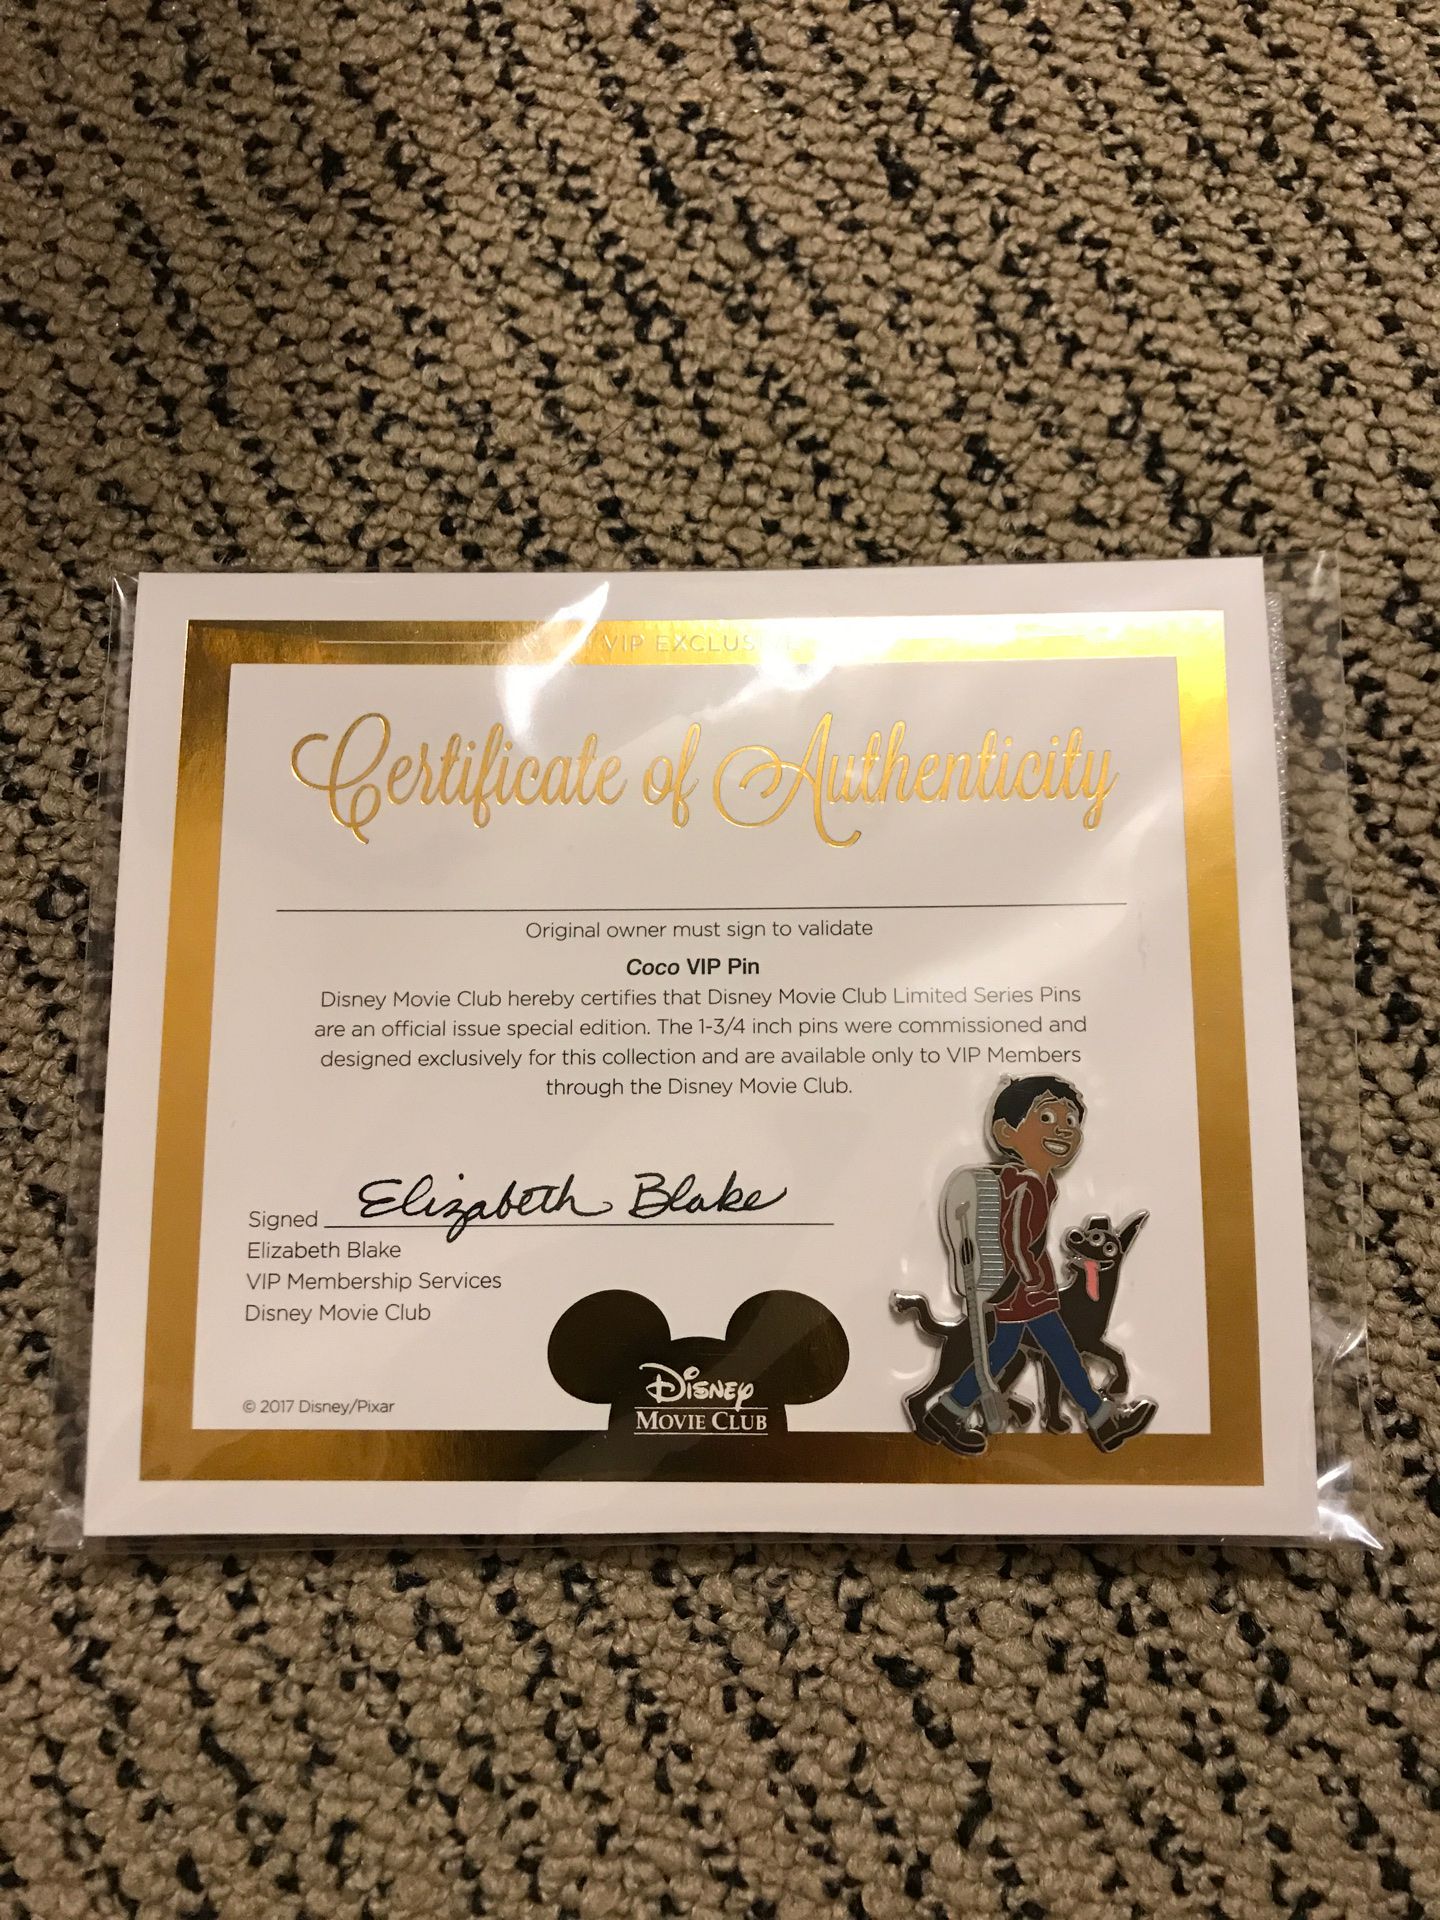 Disney Coco pin and certificate of authenticity